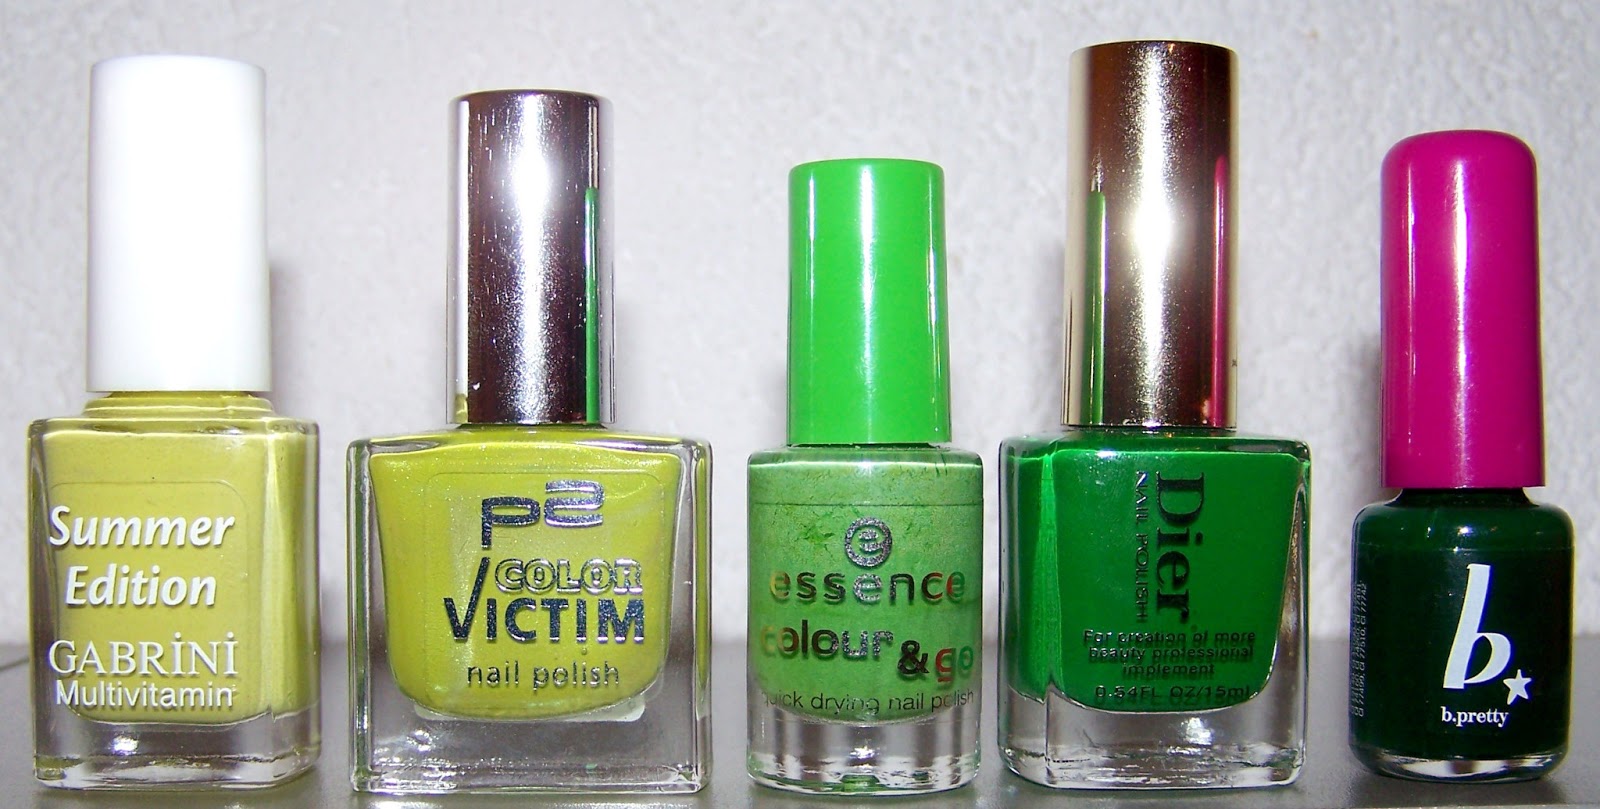 3. Neon Lime Green Ombre Nail Design - wide 3